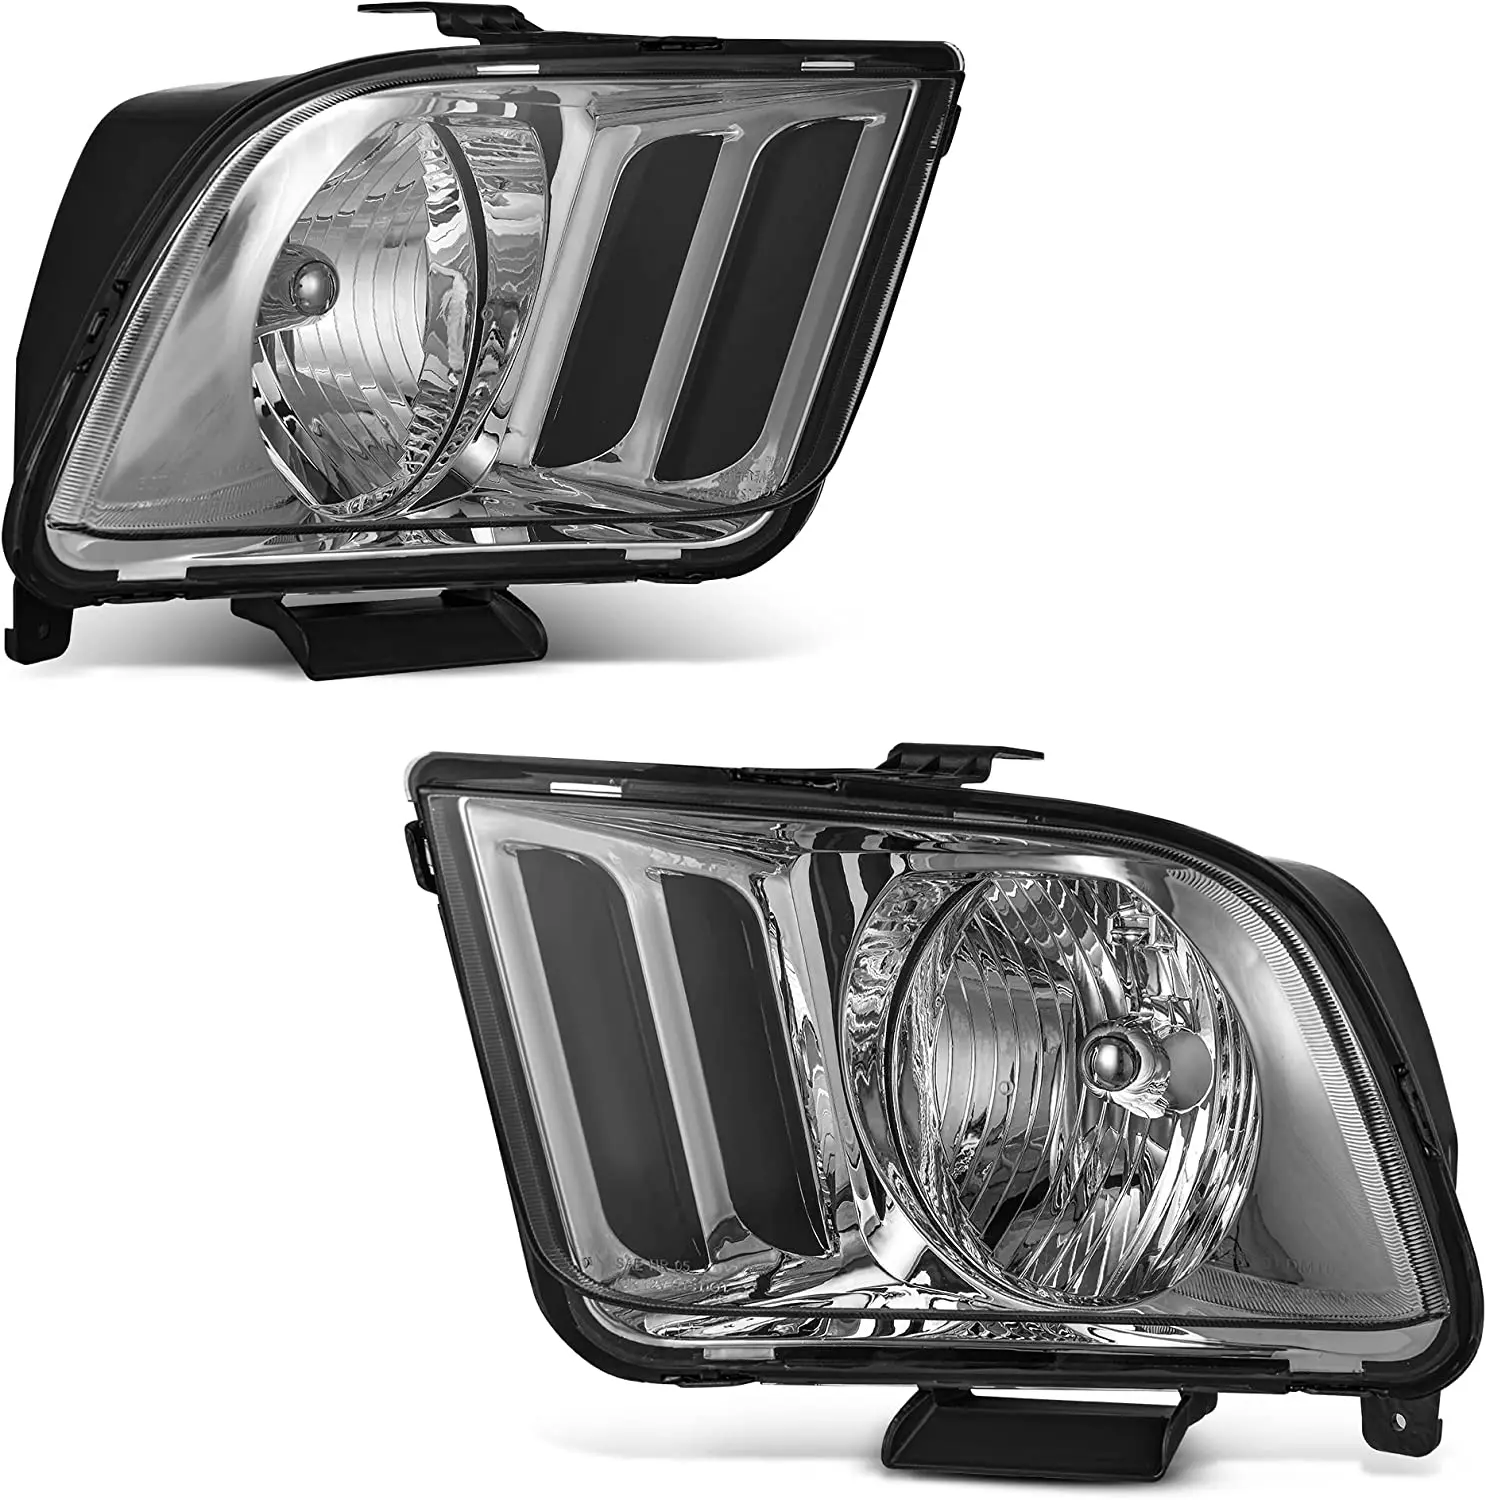 

Headlight Assembly Compatible with 05 06 07 08 09 2005-2009 Ford Mustang Chrome Housing Smoke Lens OE Style Headlamps Replacemen